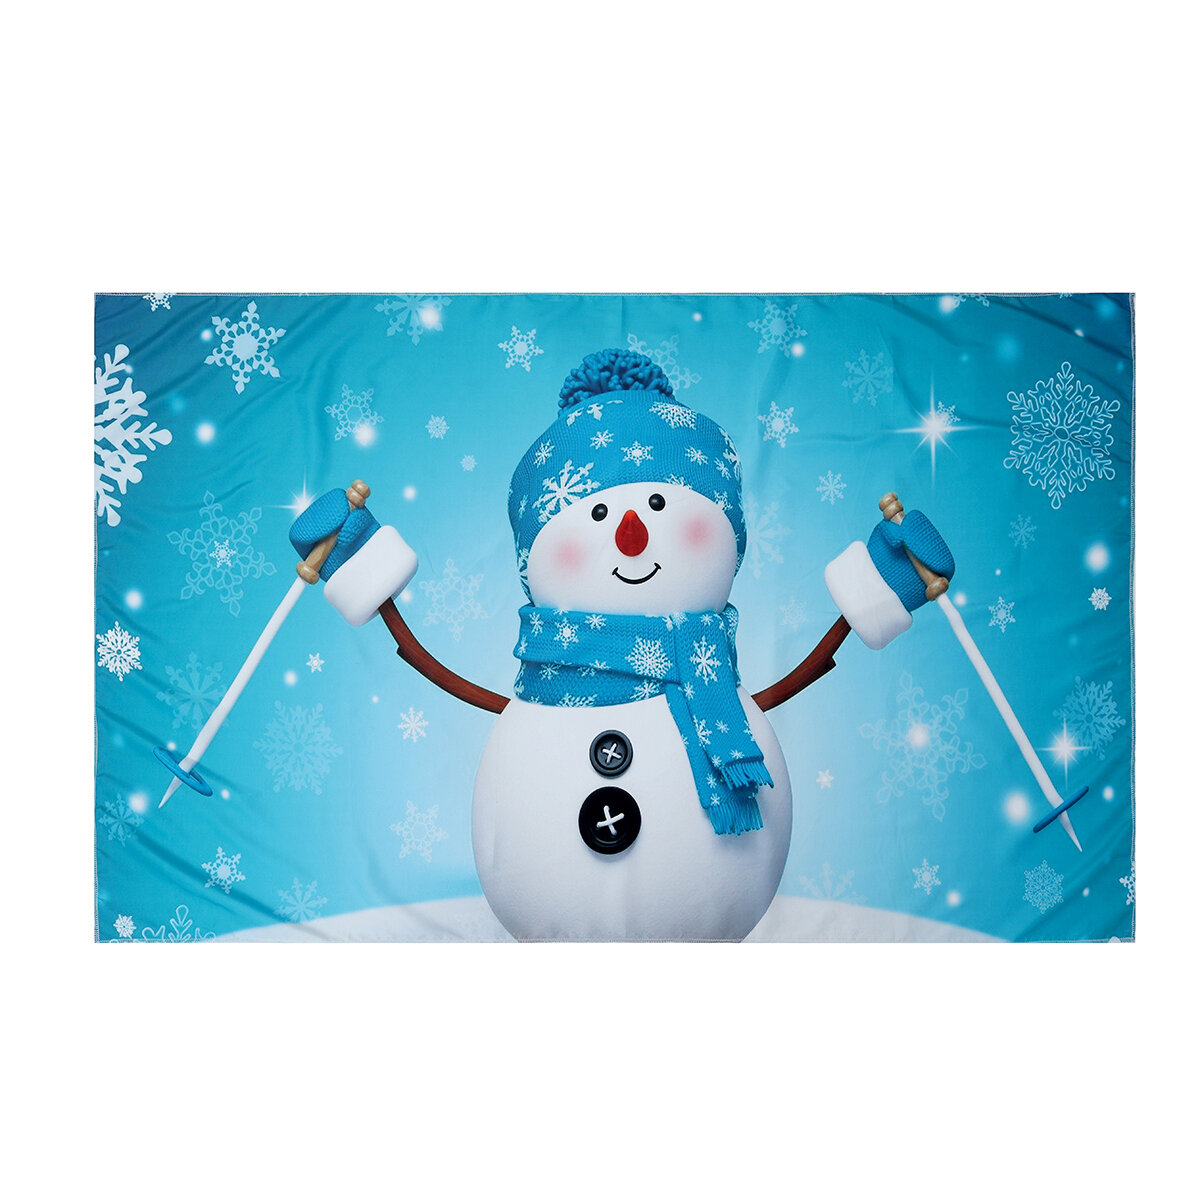 3D Snowman Wall Hanging Cloth Photography Background Cloth Hanging Painting Tapestry Wall Decoration